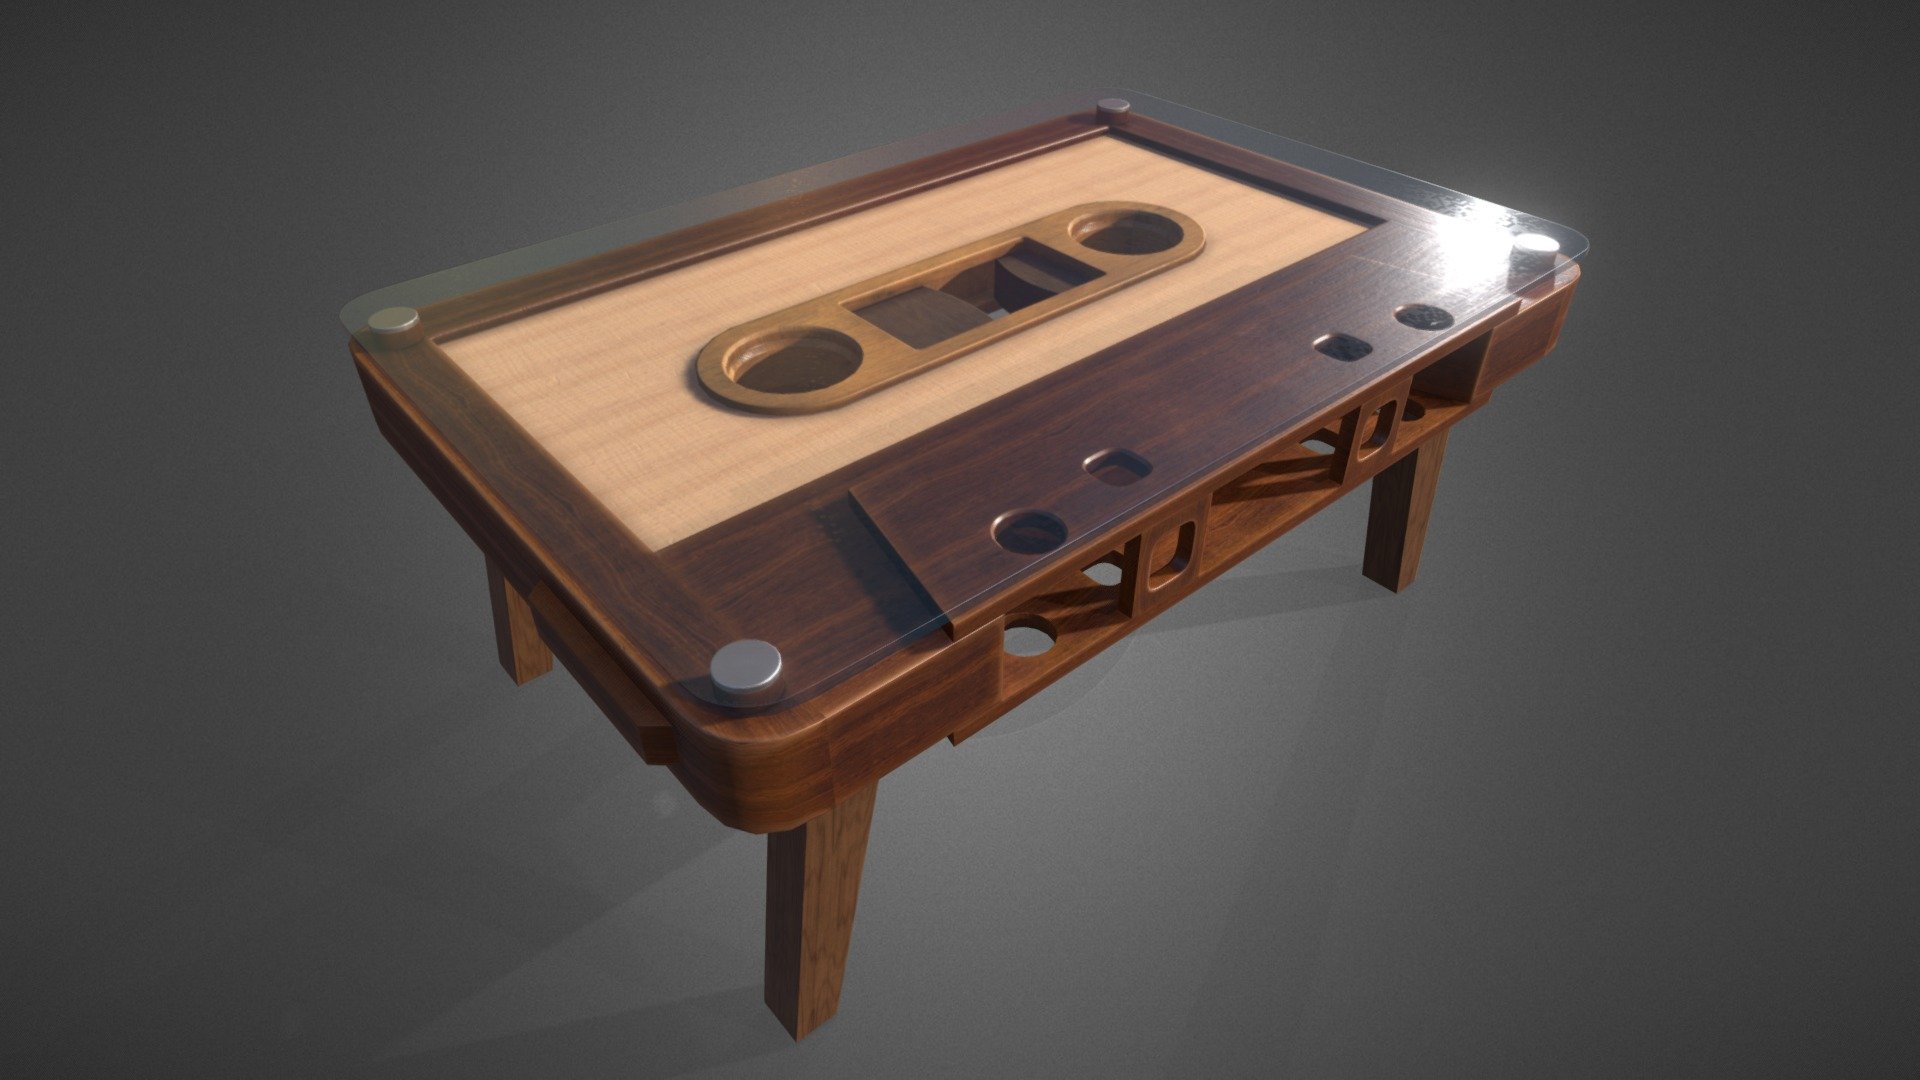 Coffee table "Cassette"